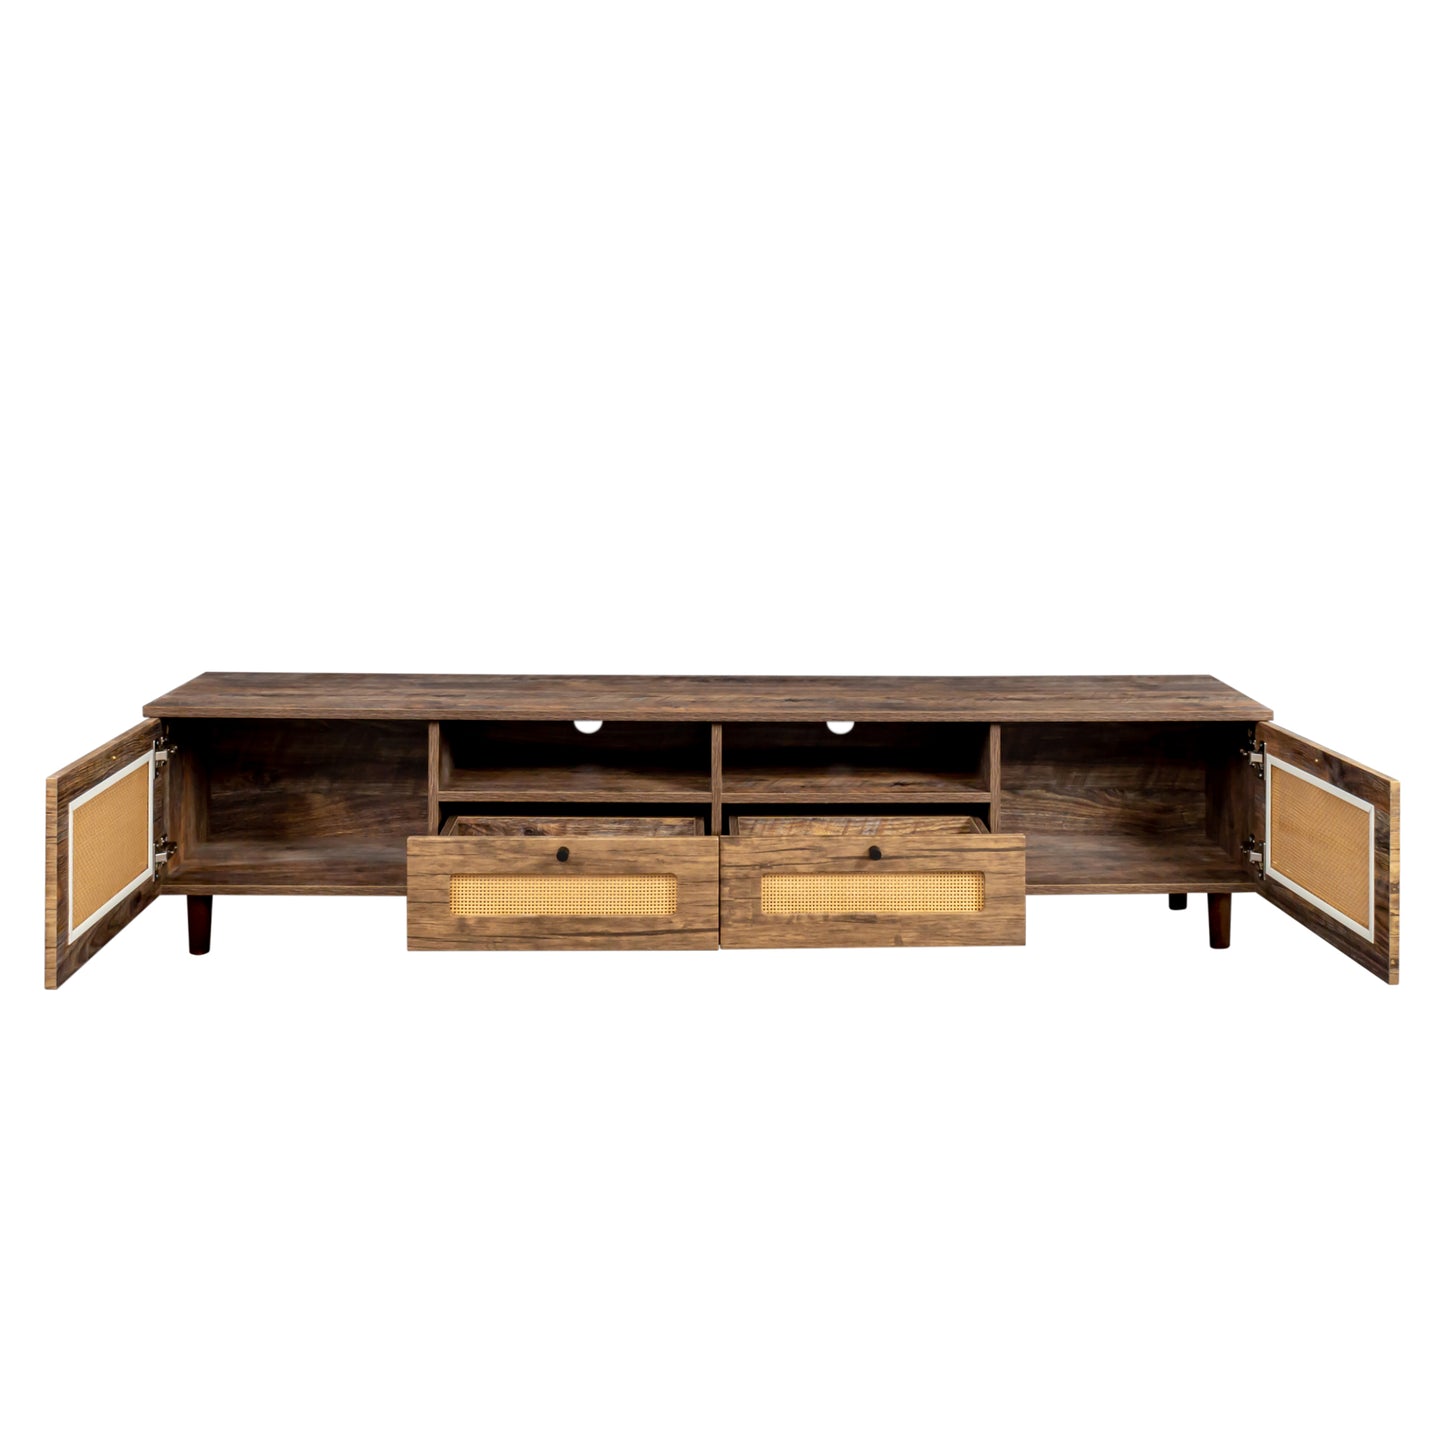 TV Stand with 2 Doors and 2 Open Shelves